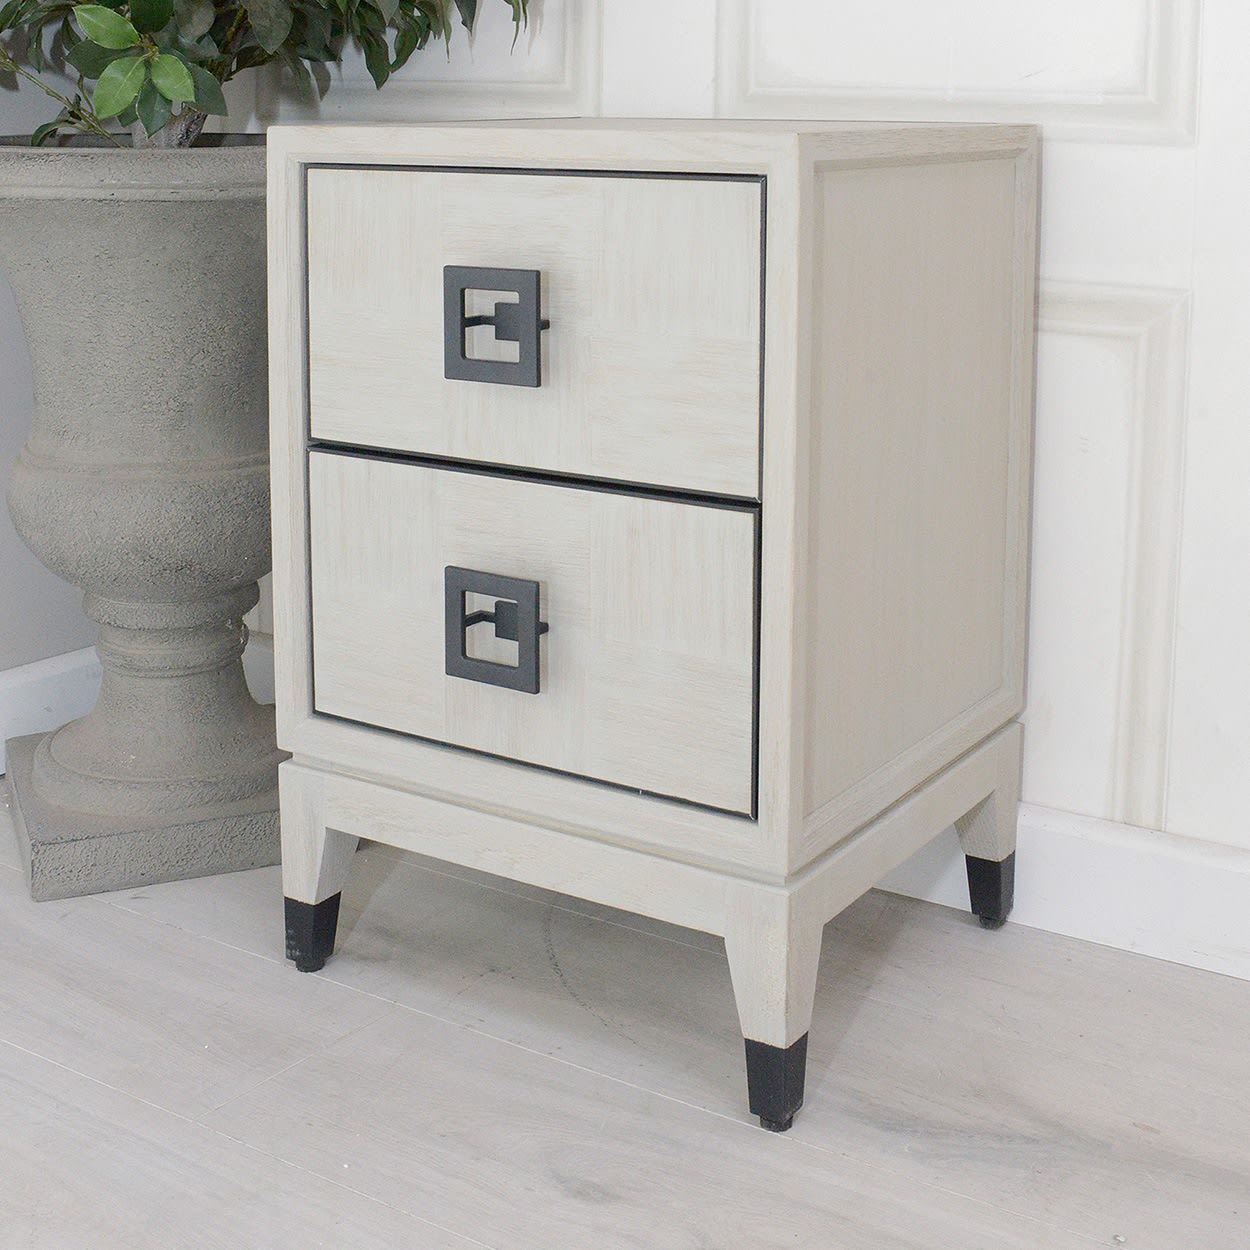 Astor Squares White Bedside Table from the Boho Furniture Collection